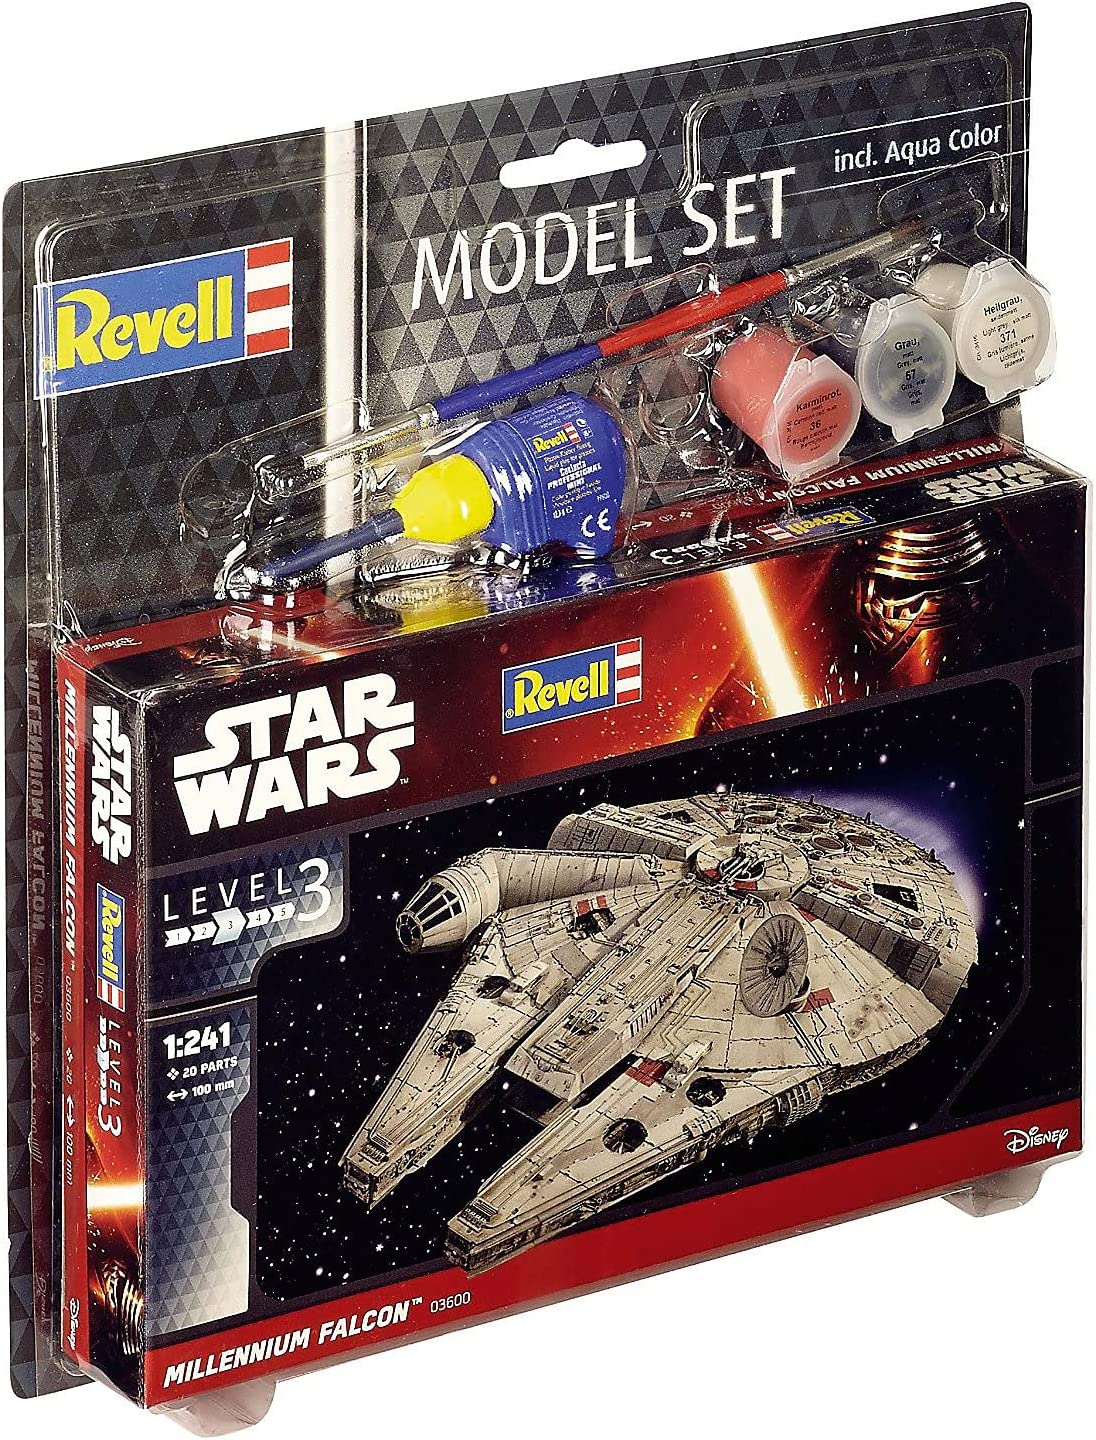 Revell 1/241 Millennium Falcon (03600) English Color Guide & Paint  Conversion Chart -   Scale Model Kits, Color Guide, Paint  Conversion, Paint Chart, Collectibles, Shop Reviews, Toys and more